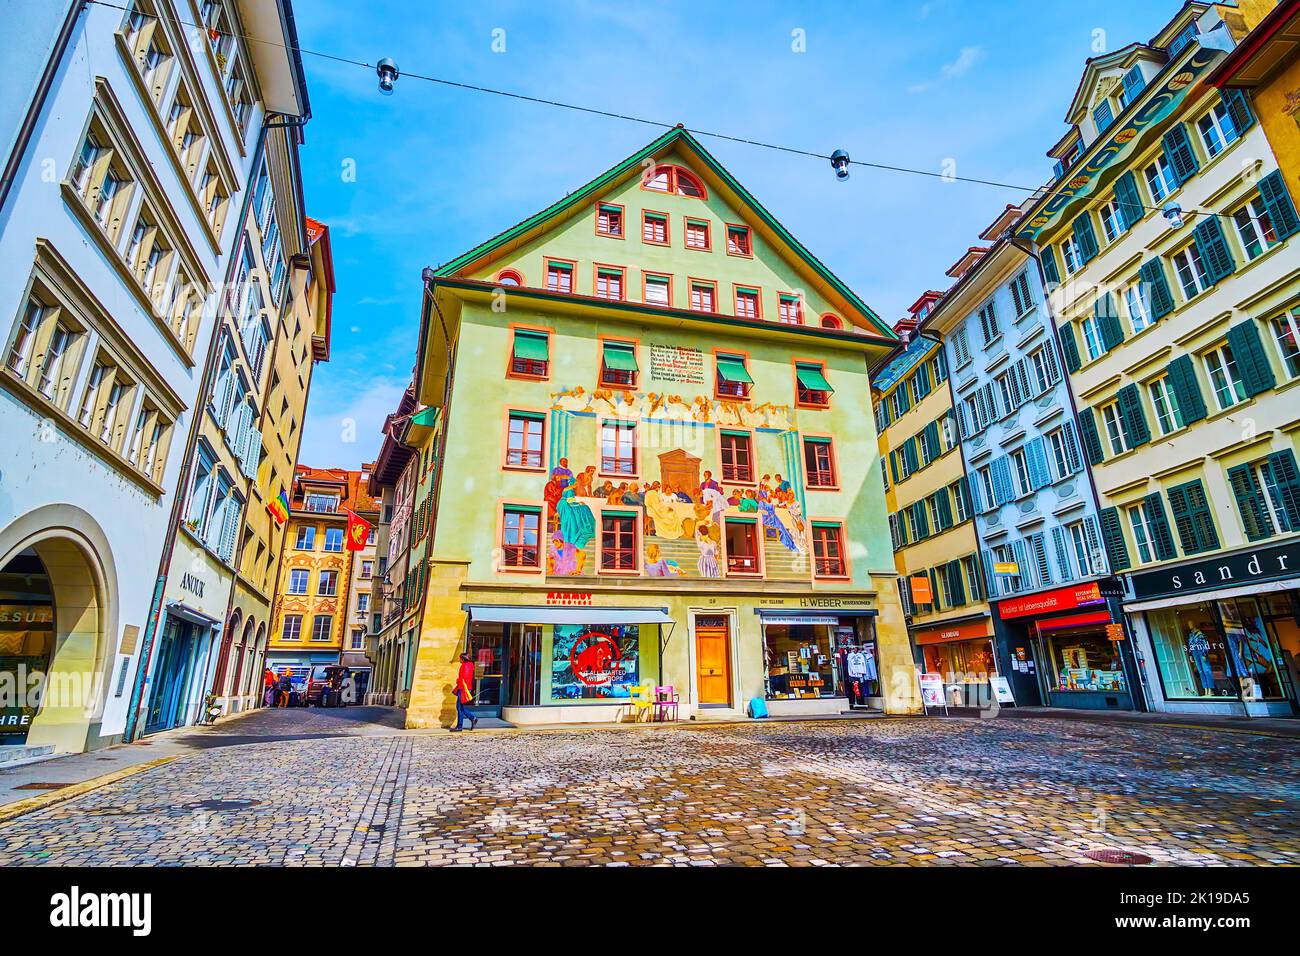 LUCERNE, SWITZERLAND - MARCH 30, 2022: Explore medieval wall art on facades of old houses on Weinmarkt square, on March 30 in Lucerne, Switzerland Stock Photo